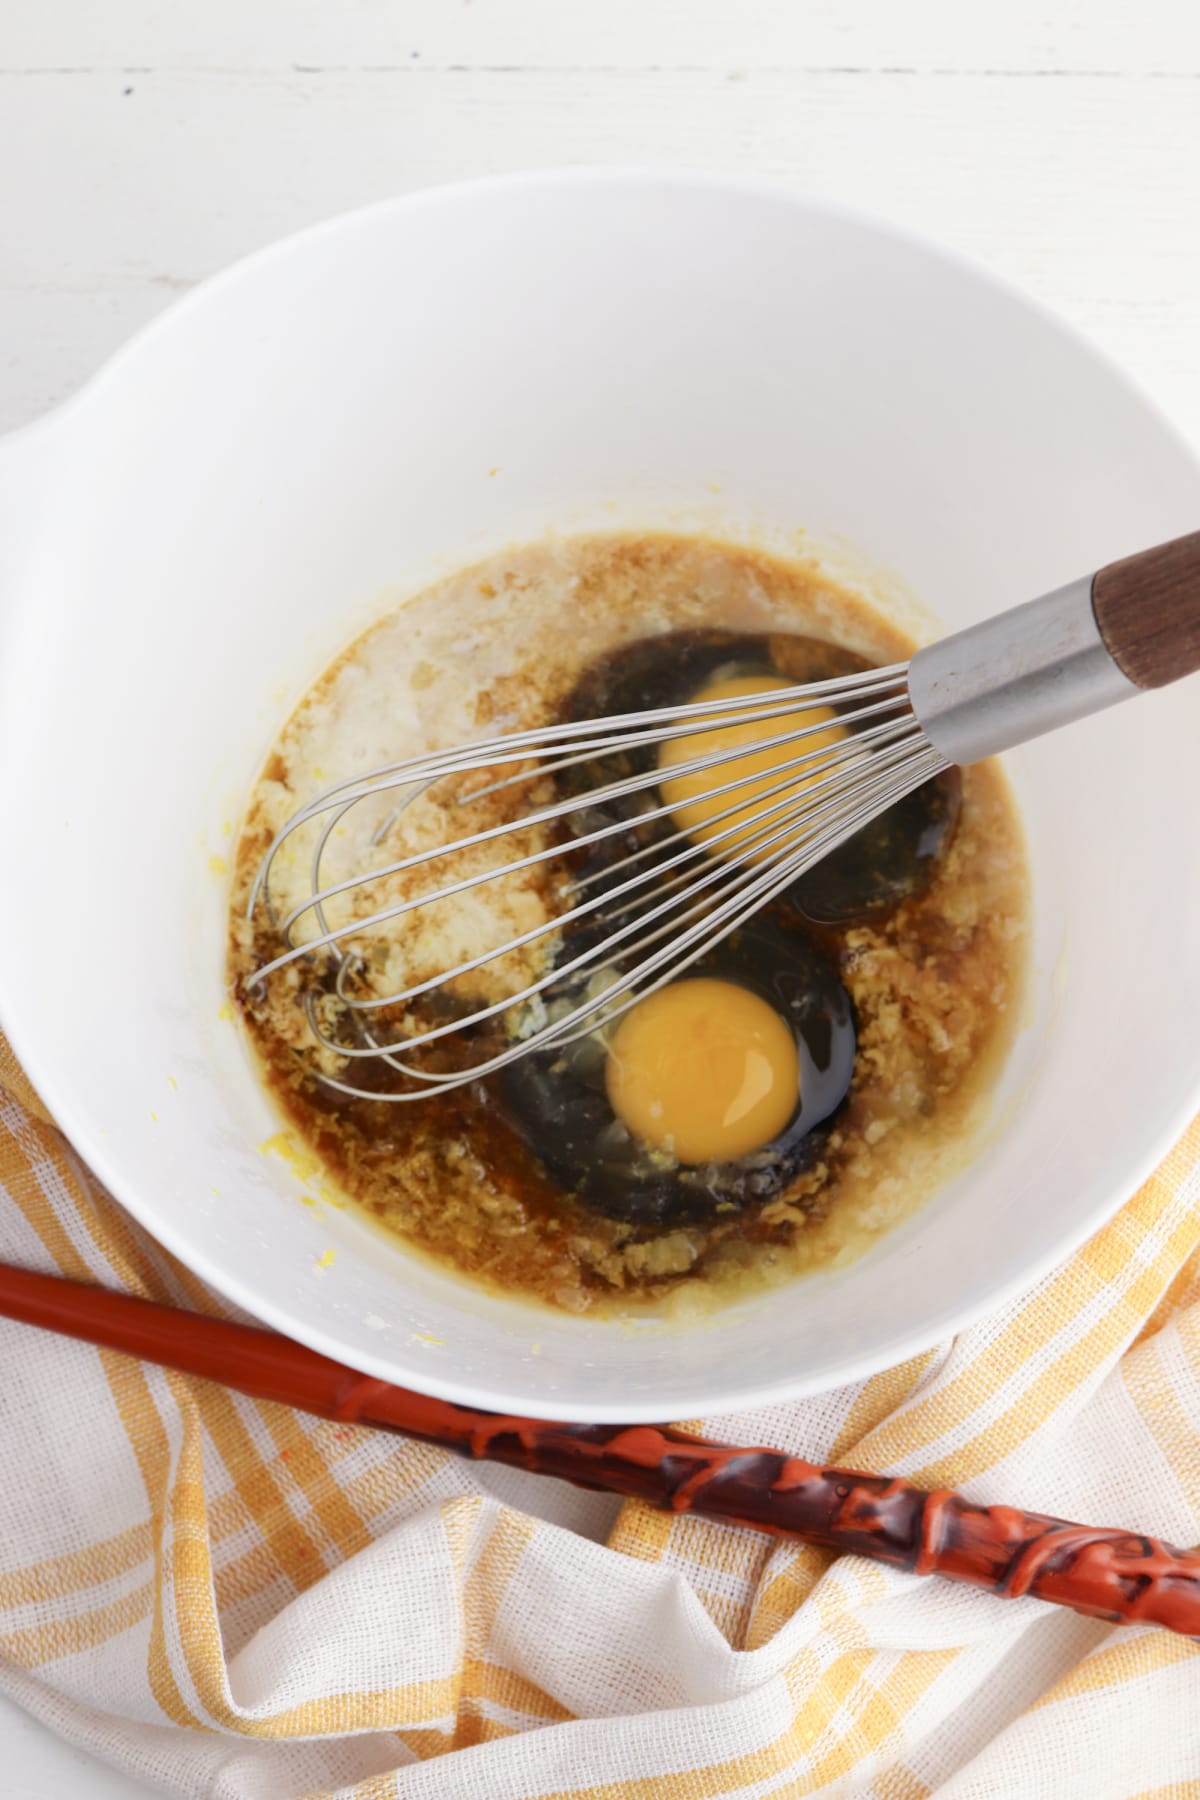 Whisking eggs with other ingredients